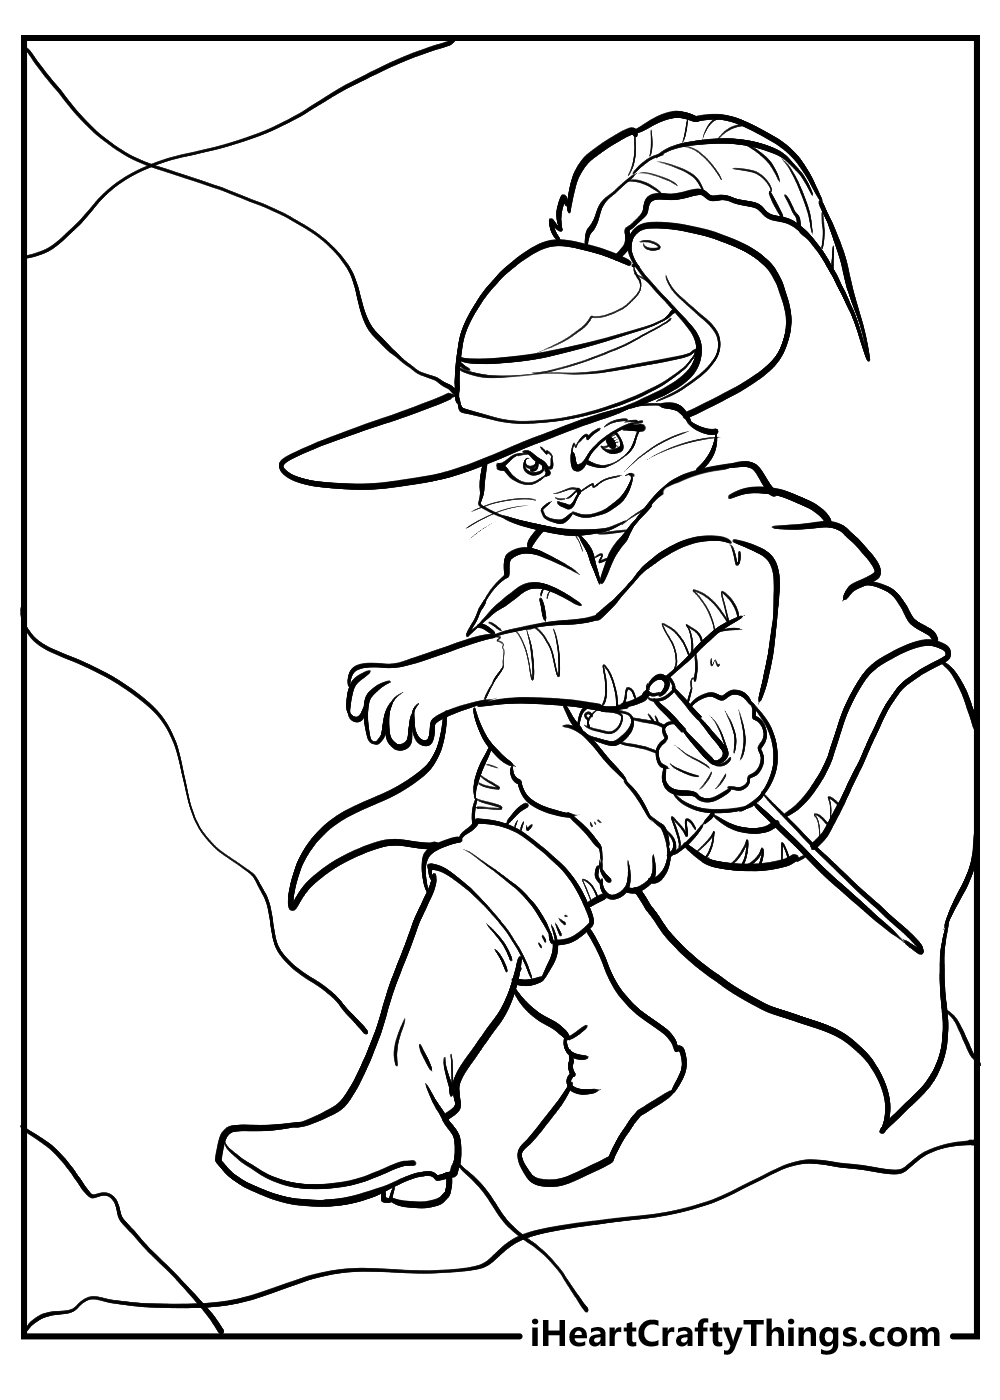 puss in boots coloring pages for kids